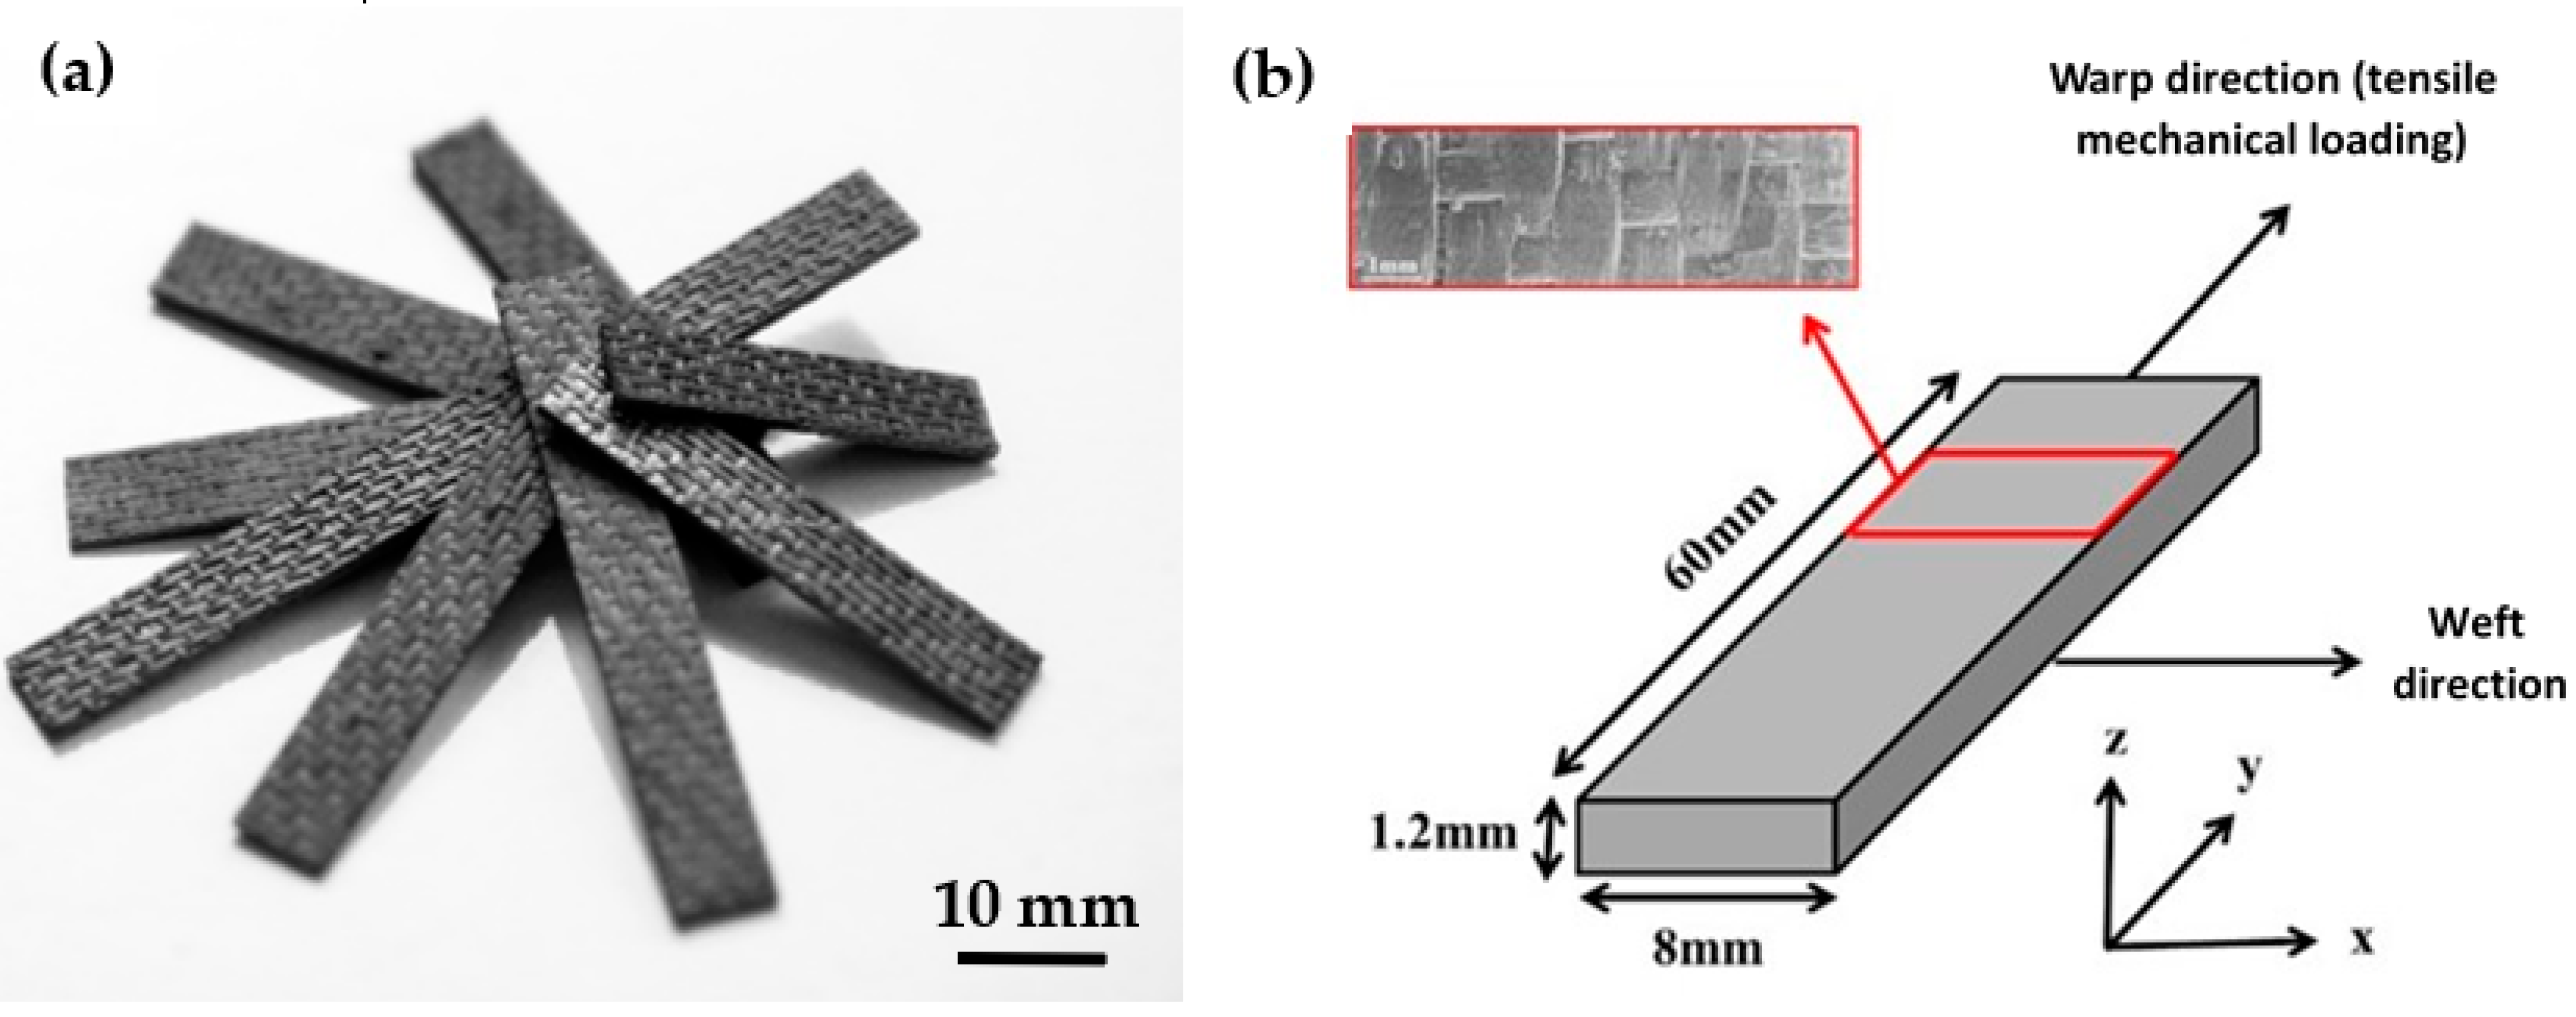 Coatings | Free Full-Text | Influence of Texture and Thickness of  Pyrocarbon Coatings as Interphase on the Mechanical Behavior of Specific  2.5D SiC/SiC Composites Reinforced with Hi-Nicalon S Fibers